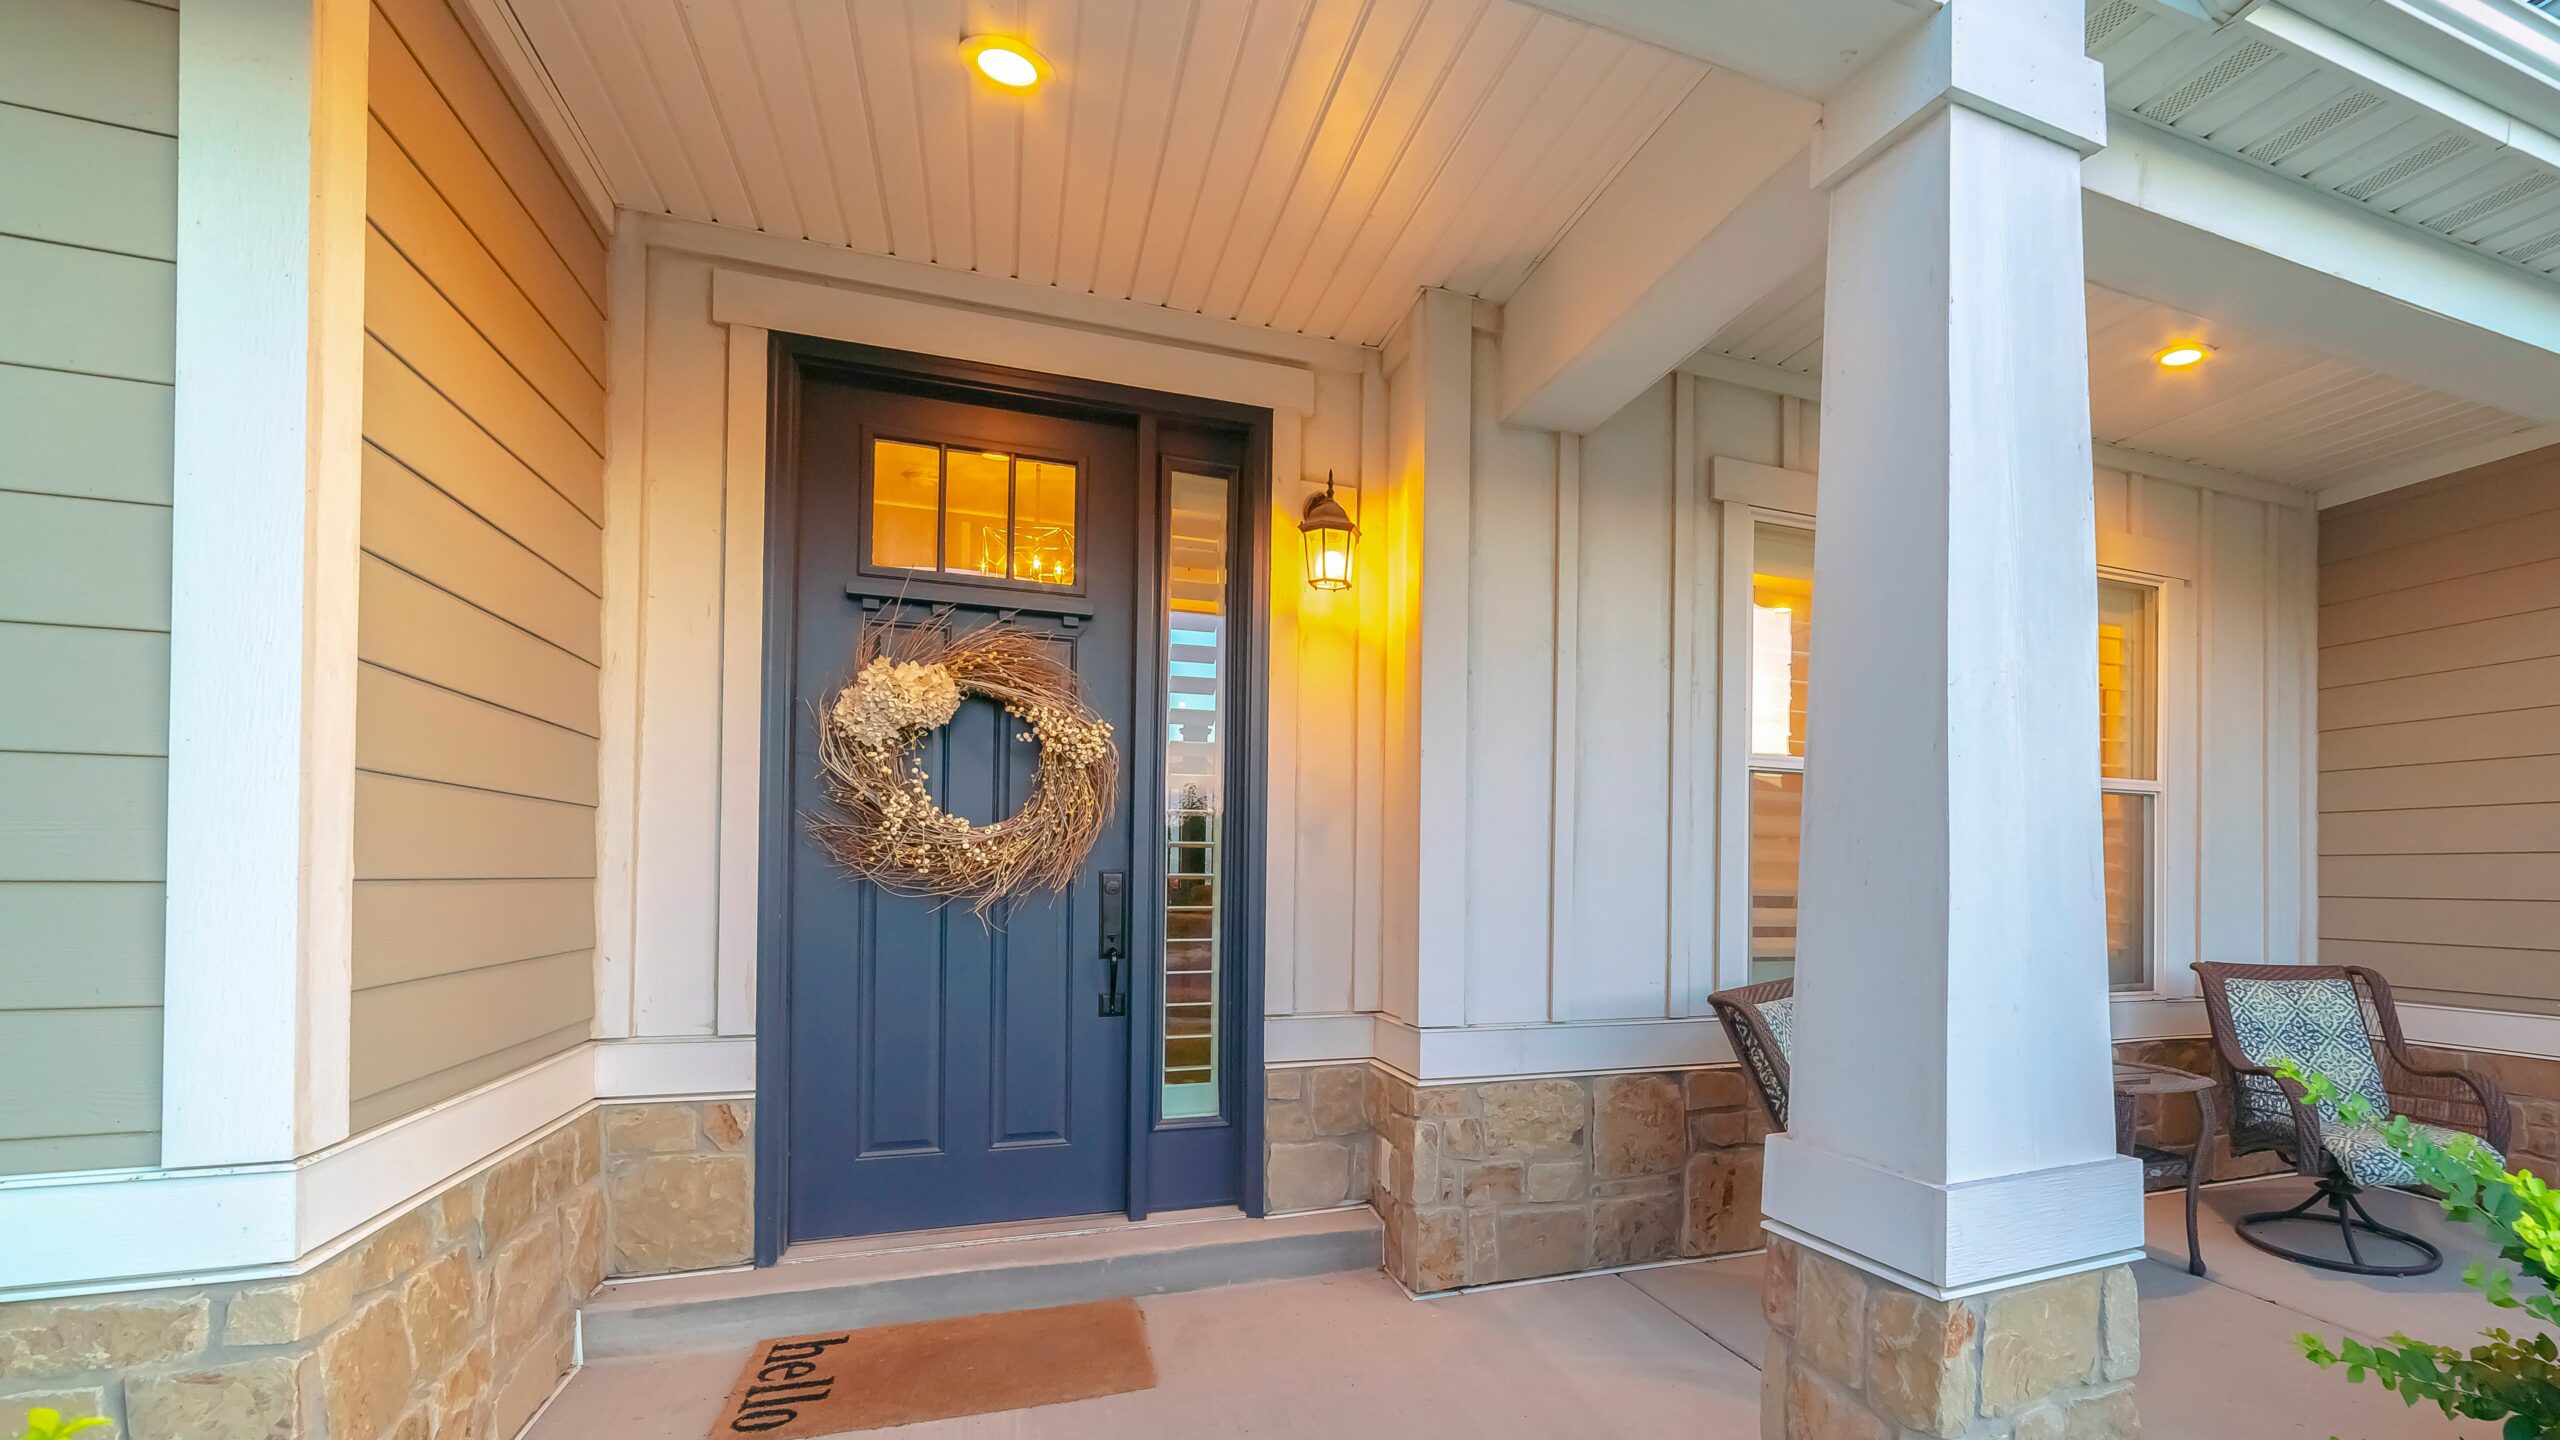 A blue door with glass features and a brown wreath in a home with detailed white siding